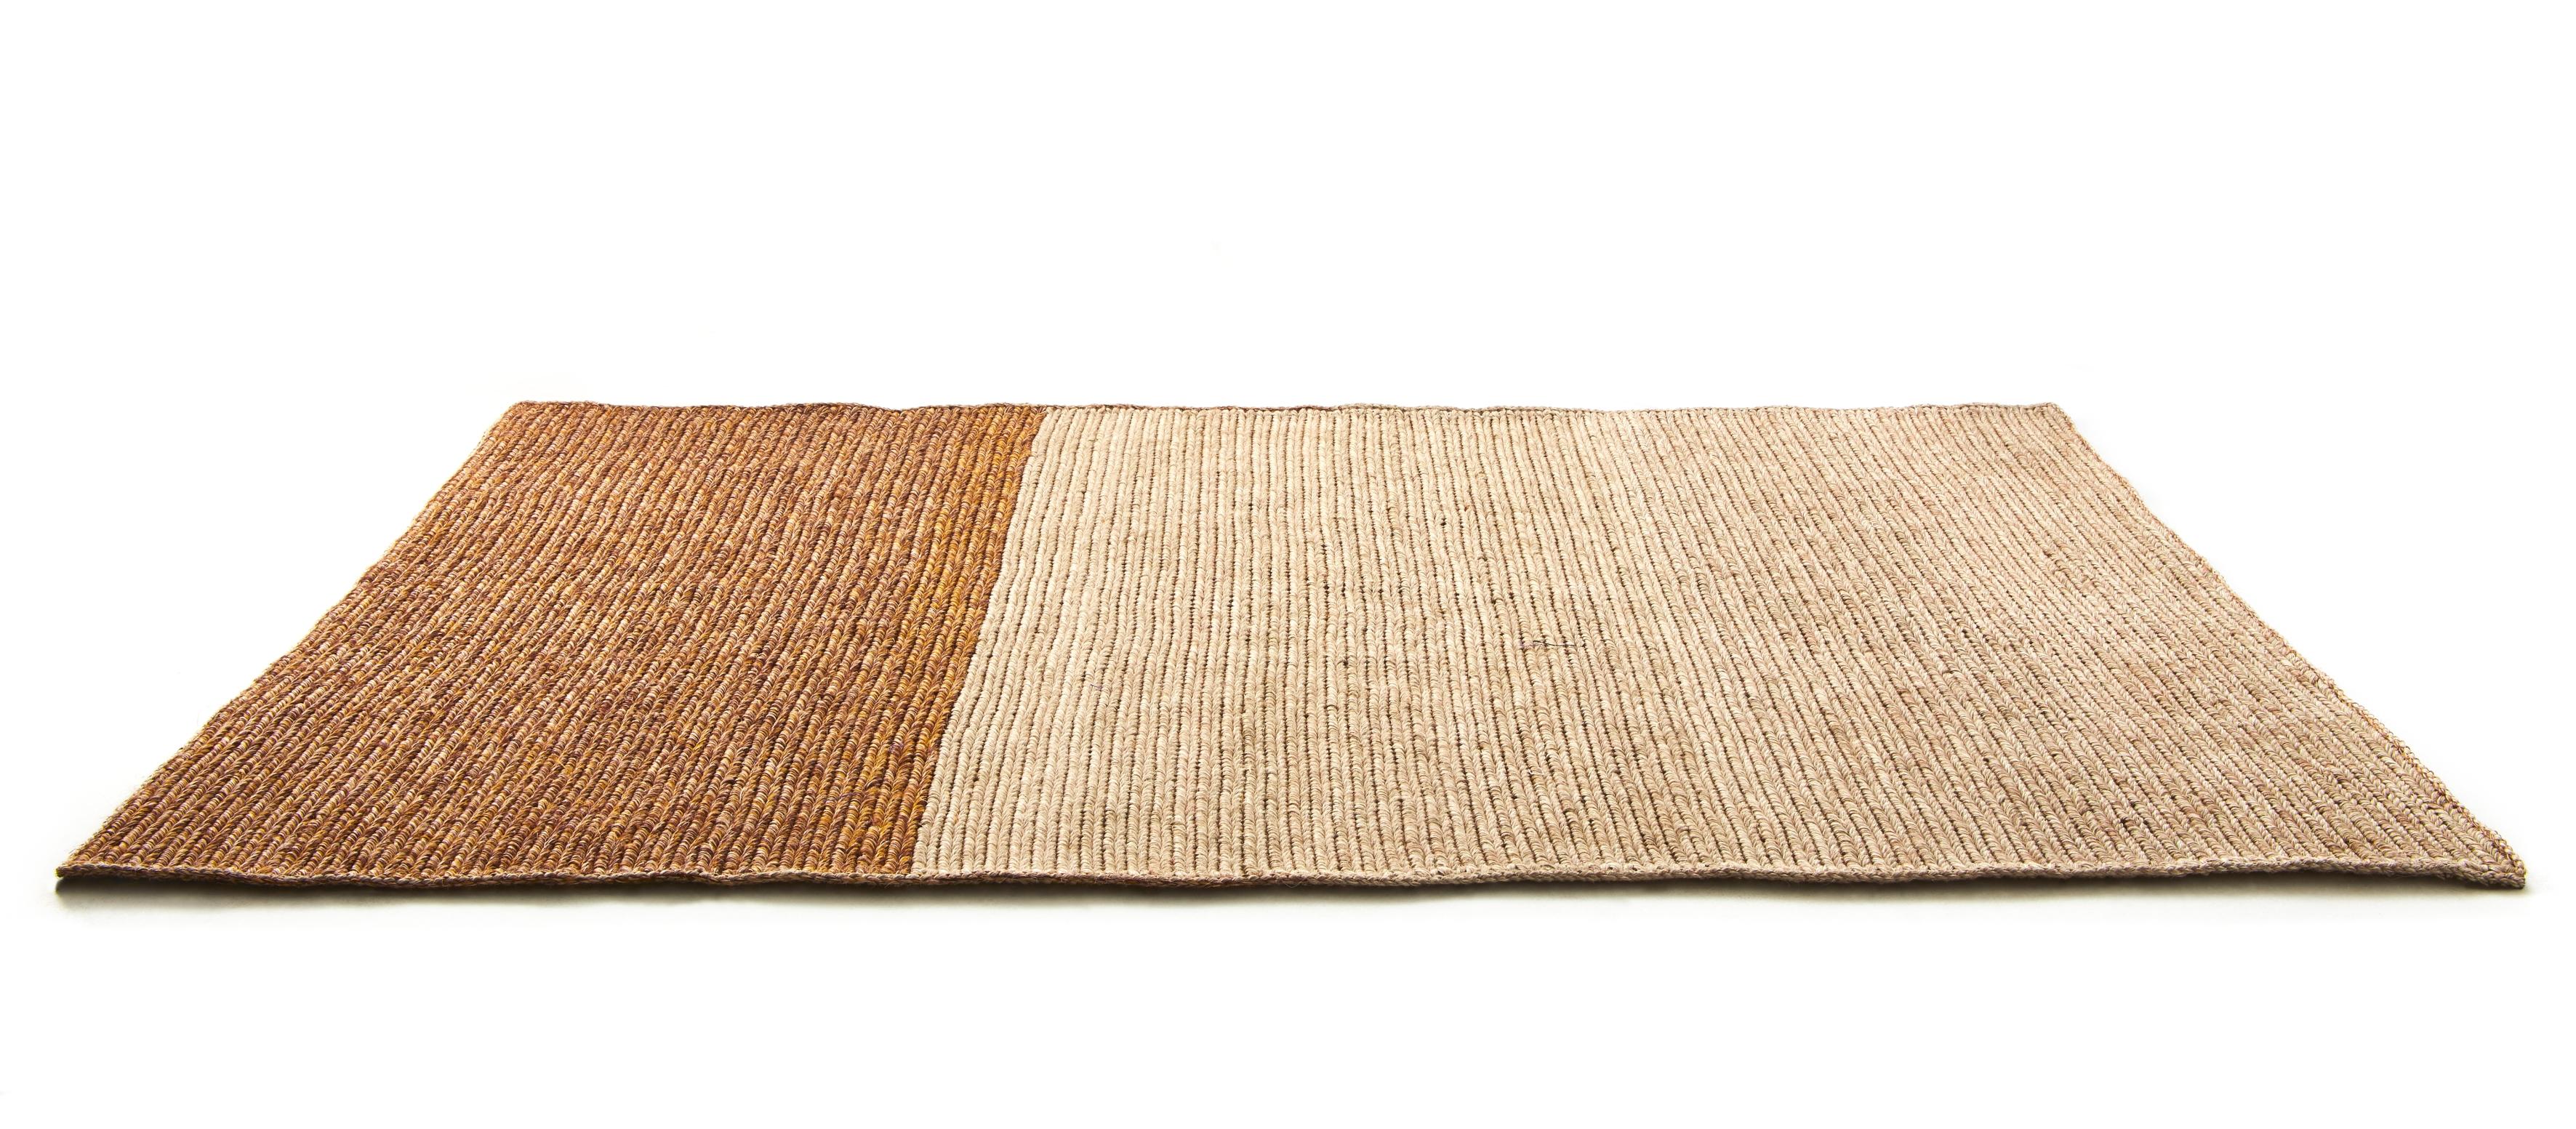 Small par rug by Sebastian Herkner
Materials: Fibres from Jipi palm leaves fibers. 
Technique: Naturally dyed fibers. Hand-woven in Colombia.
Dimensions: W 160 x L 220 cm 
Available in colors: cacao melange/ brown melange, light grey melange/